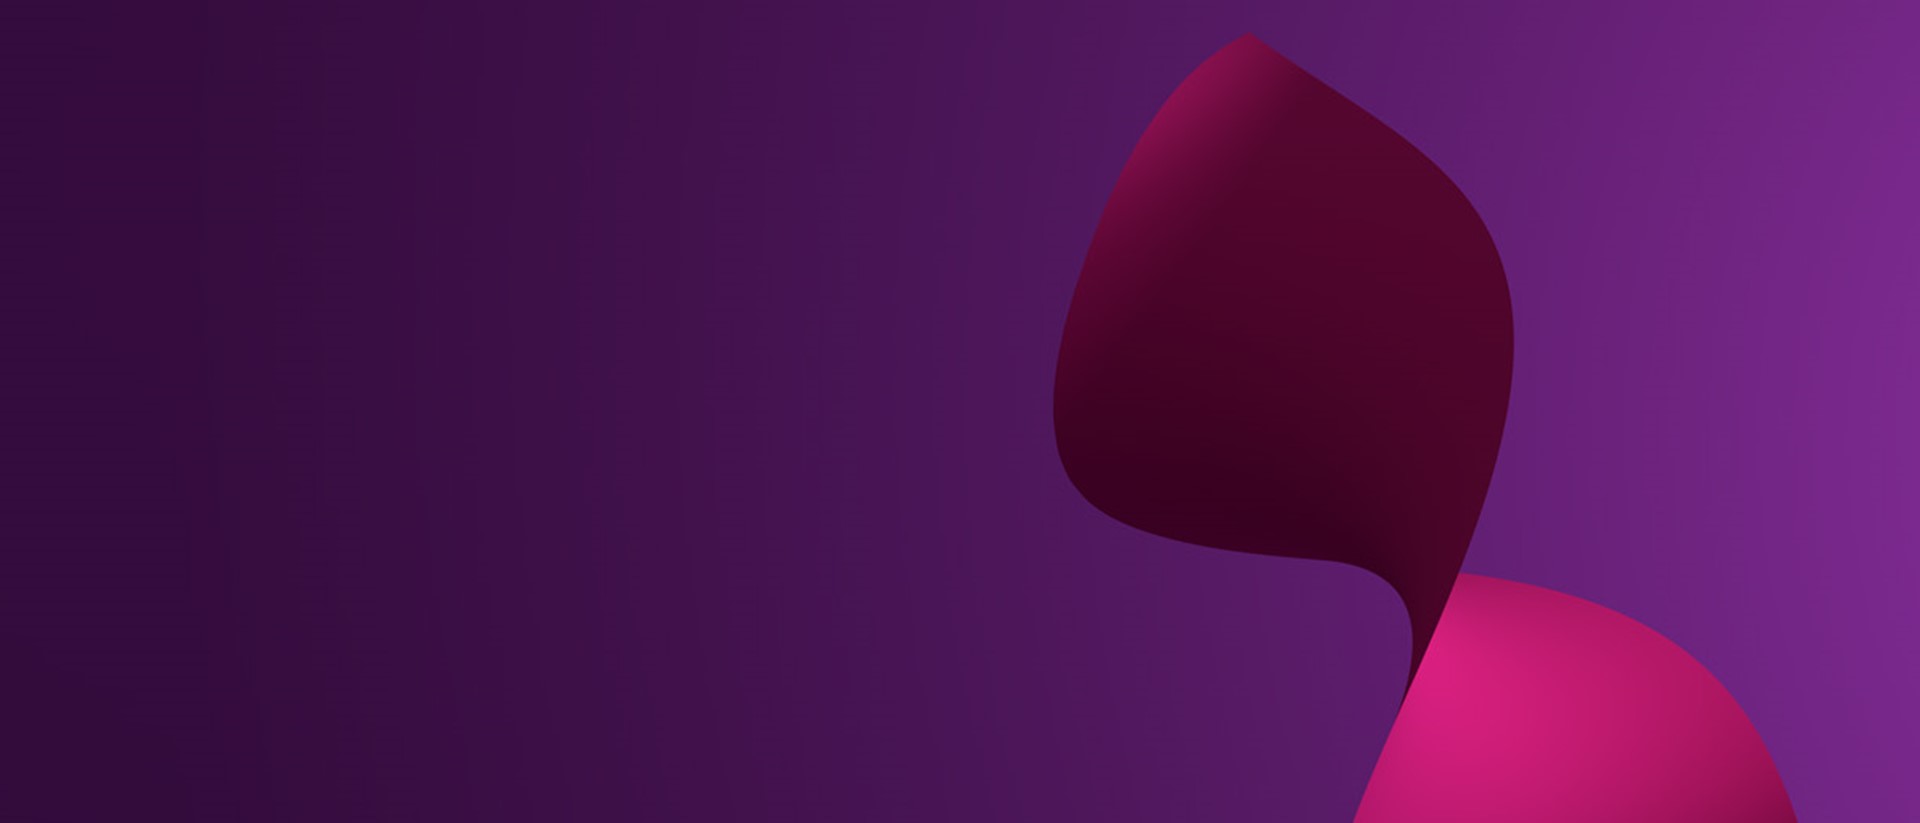 Image of an abstract pink shape against a purple background